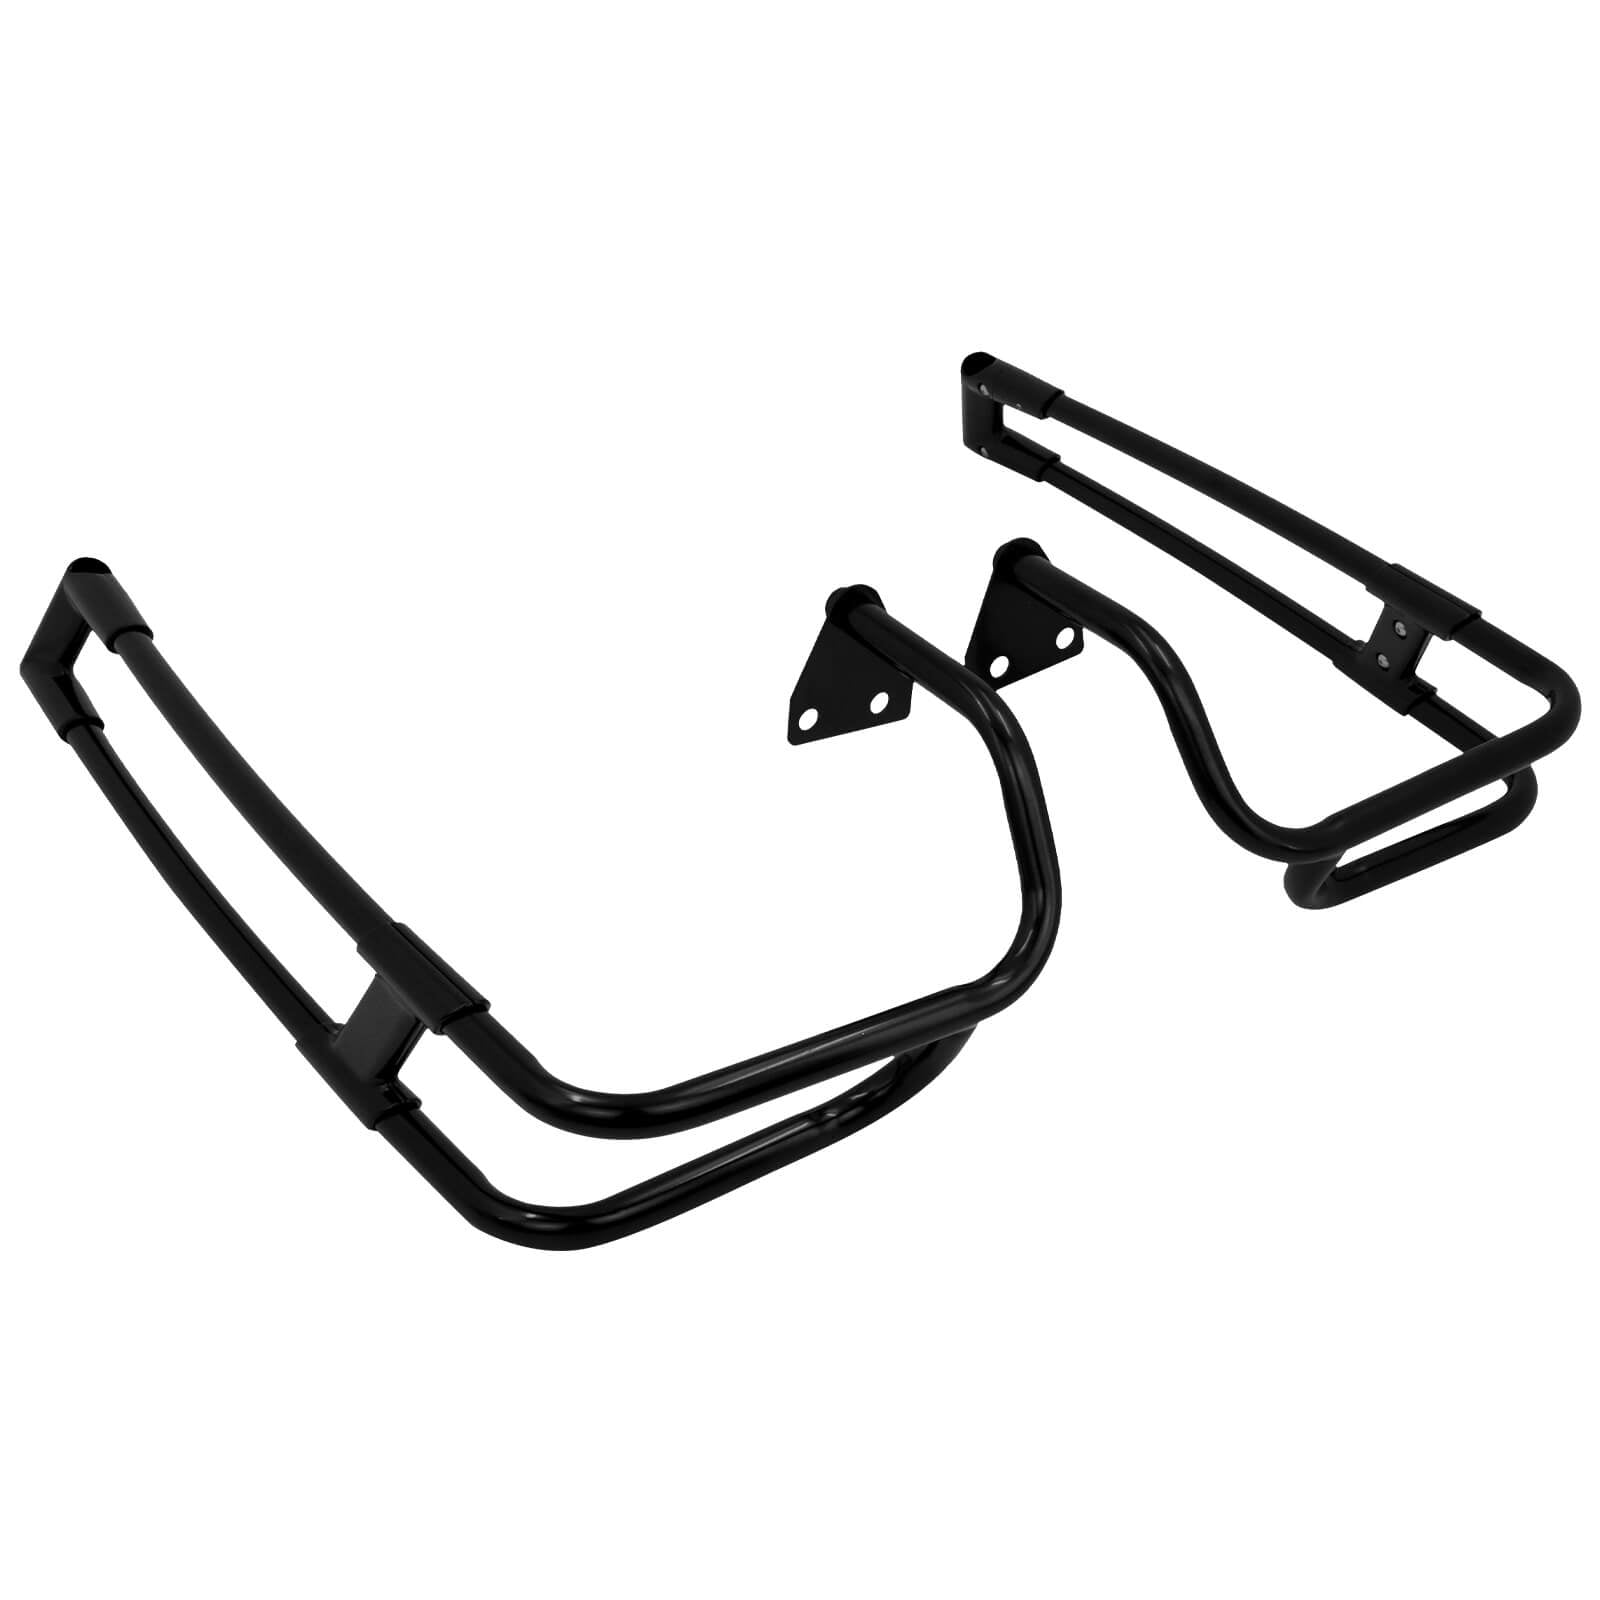 Mactions motorcycle twin rails saddlebag guard rails for Harley Touring 2009-2013 TH029601